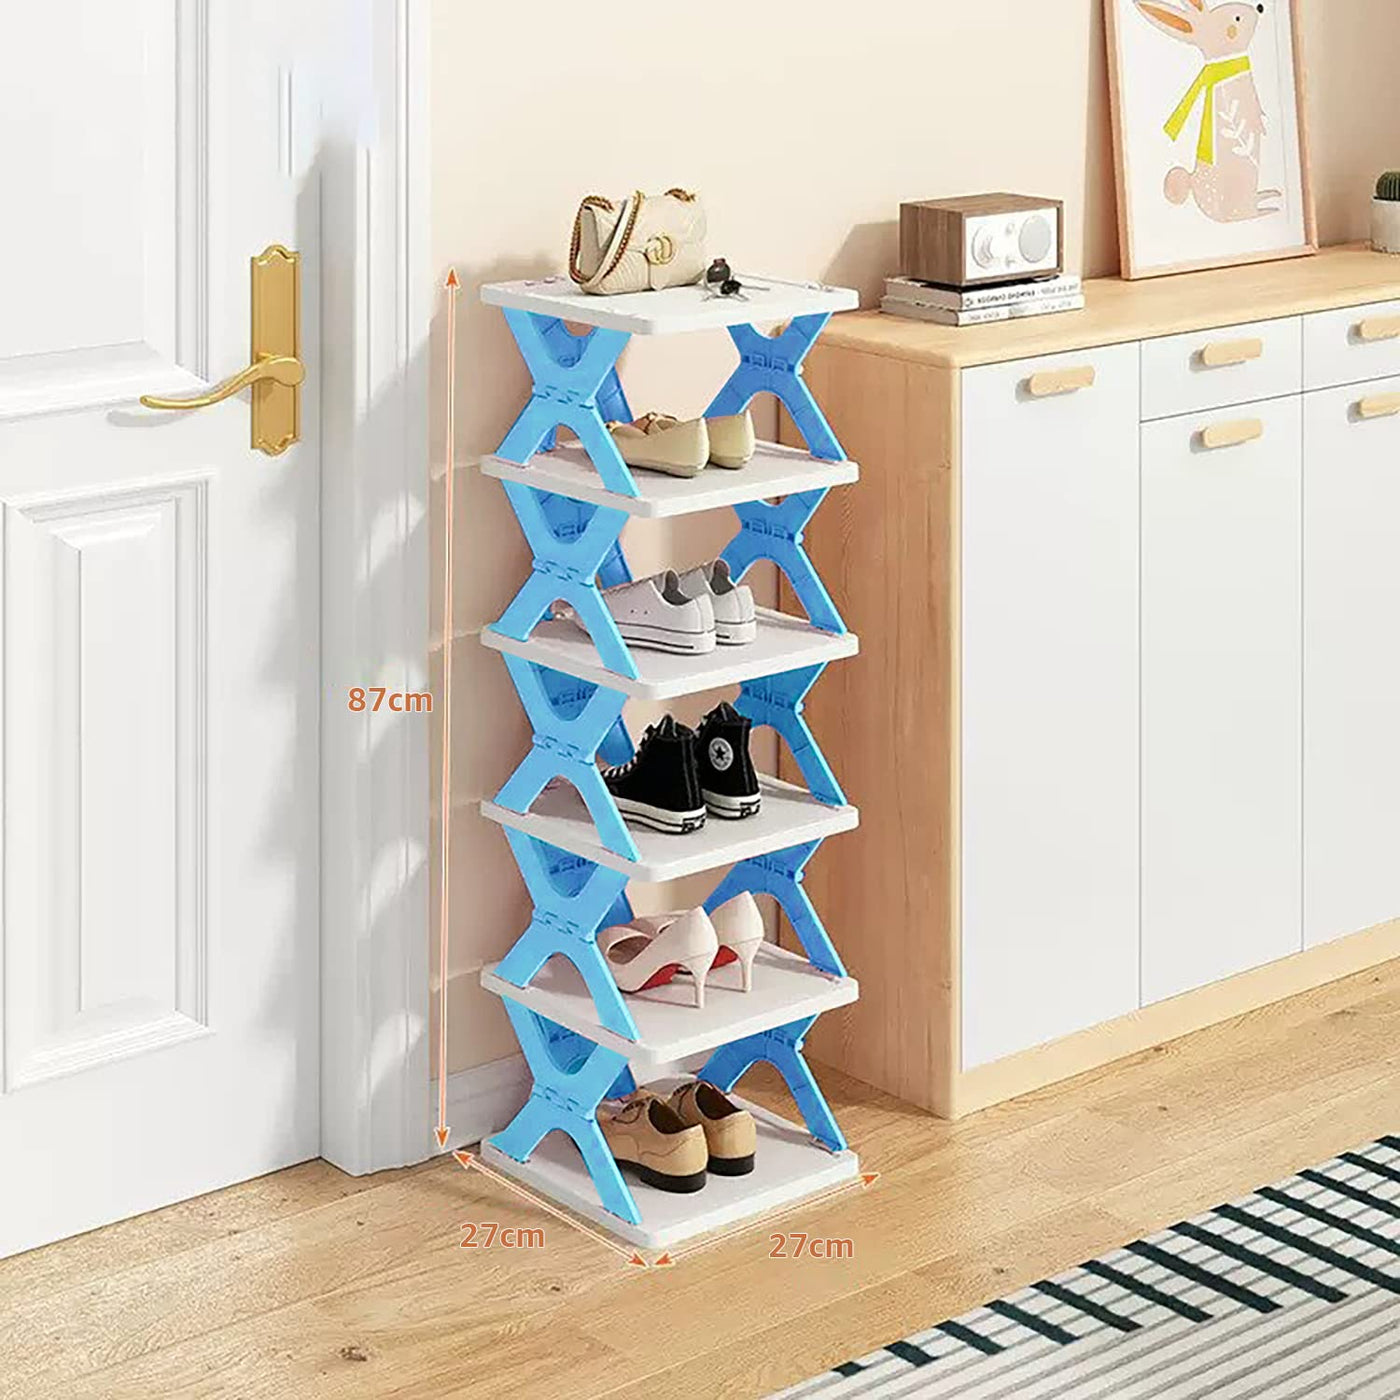 6 Tier Collapsible Shoes Stand, Rack Suit for Small Spaces,Closet,Small Entryway - (Blue)